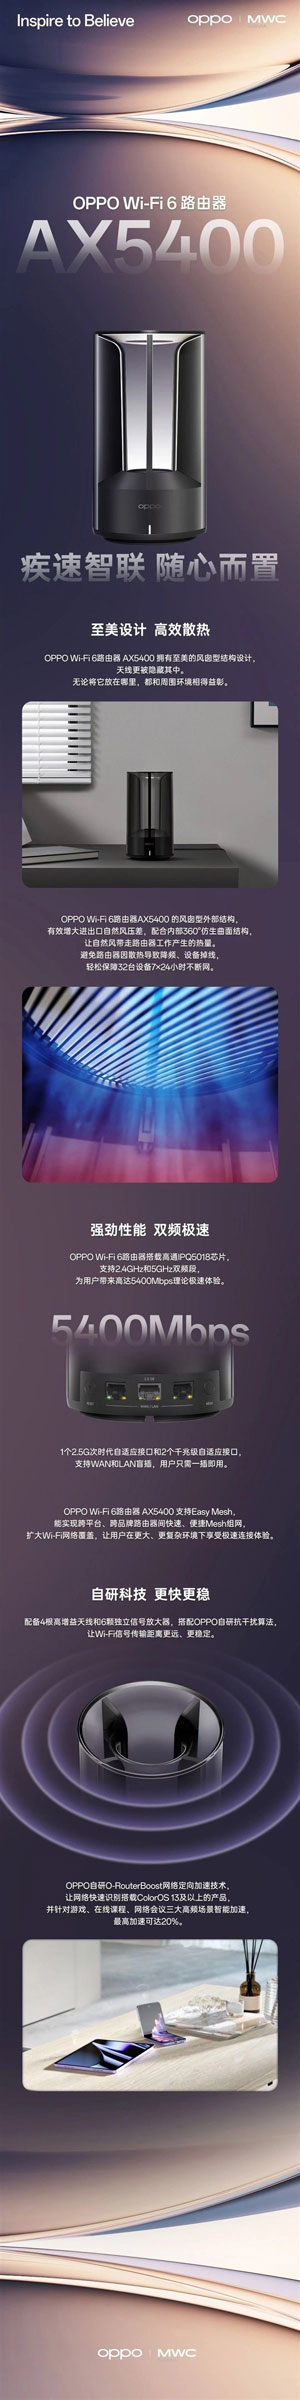 OPPO AX5400 router Wi-Fi 6